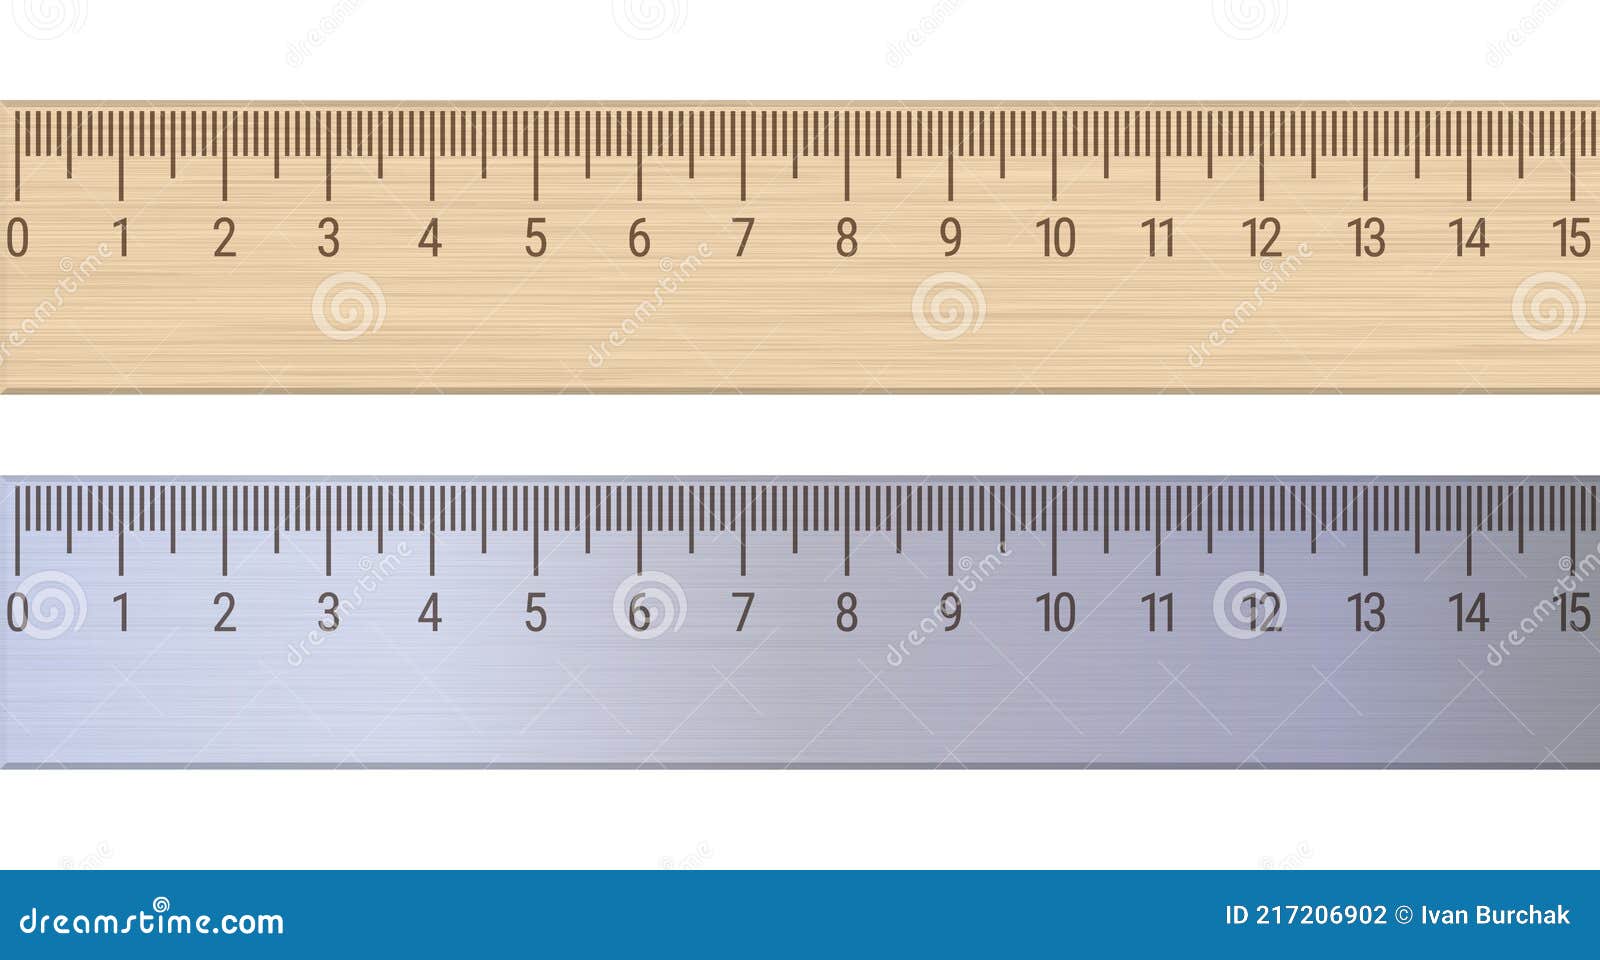 Wood and metal rulers. 3D realistic vector illustration isolated on white